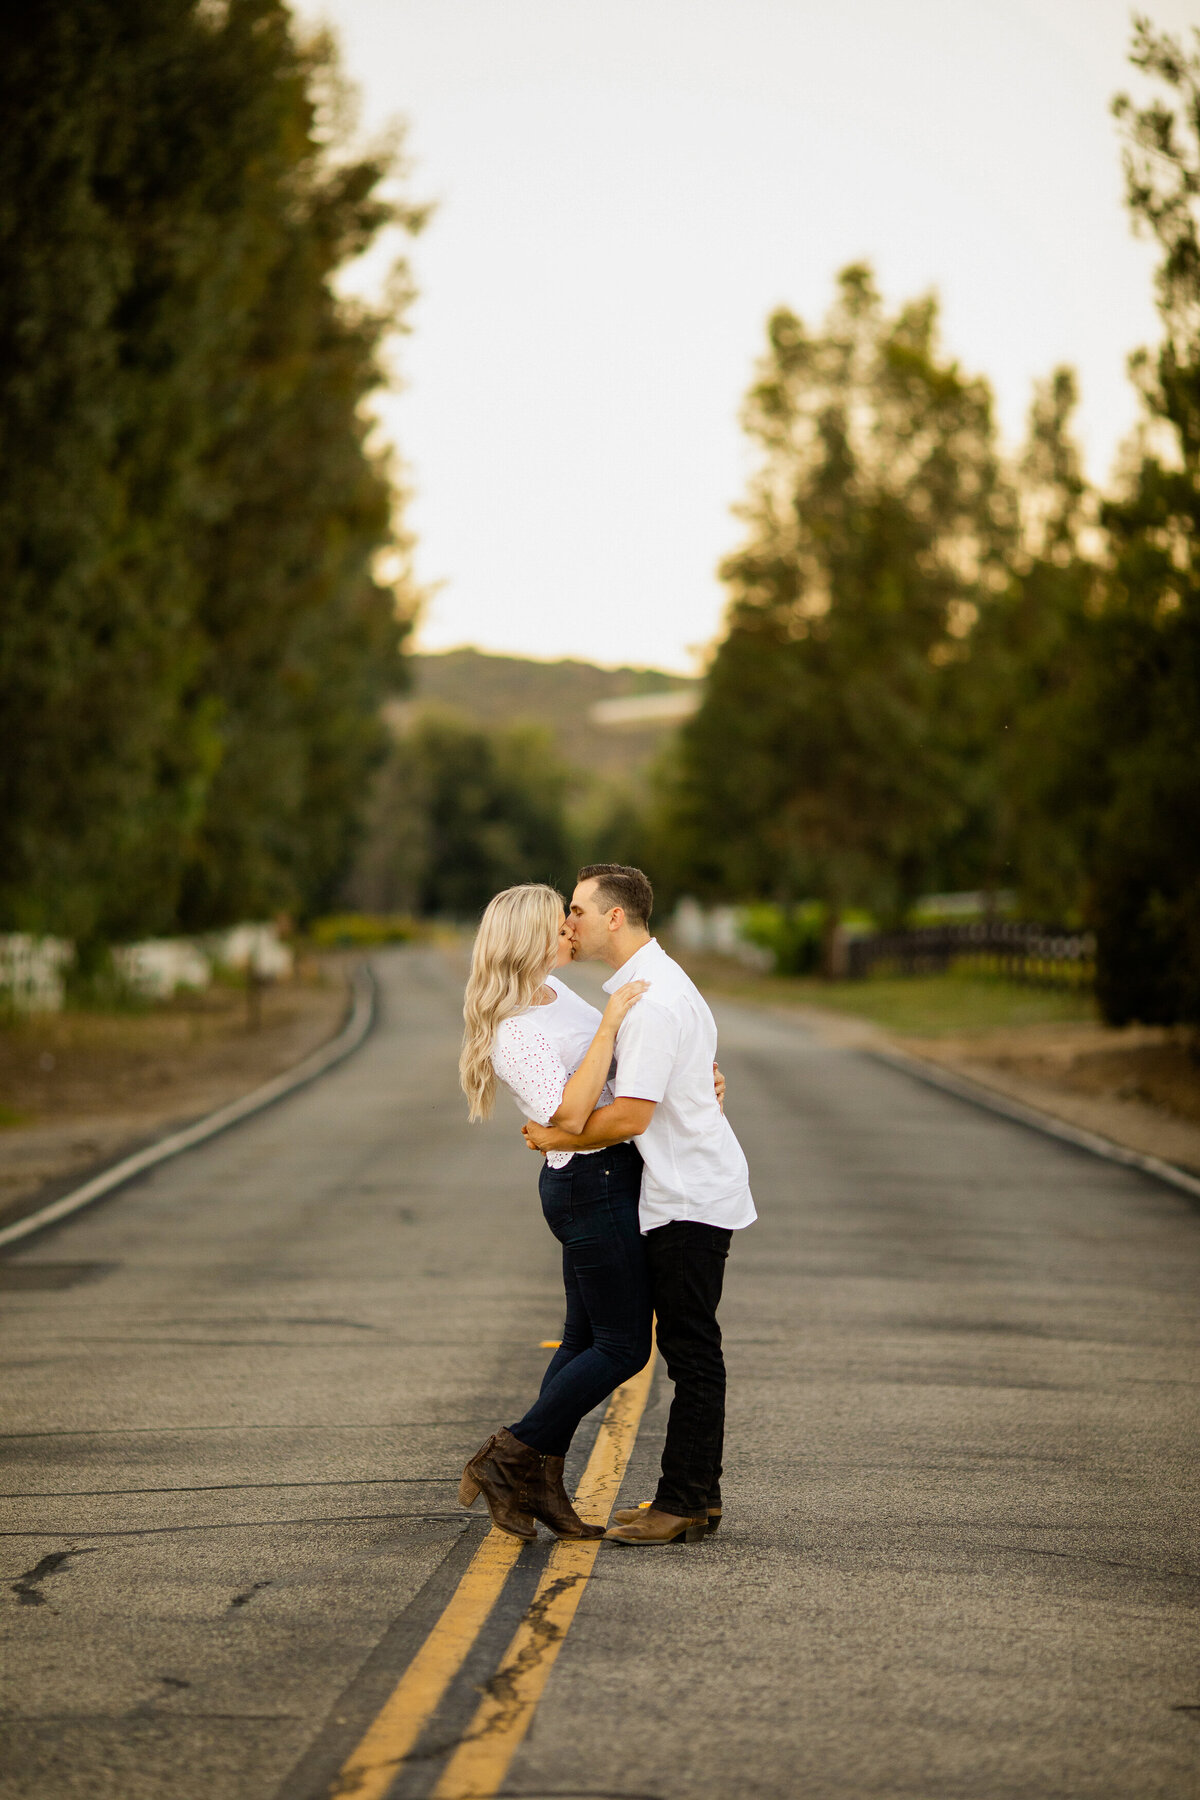 10-engagement-session-tips-013